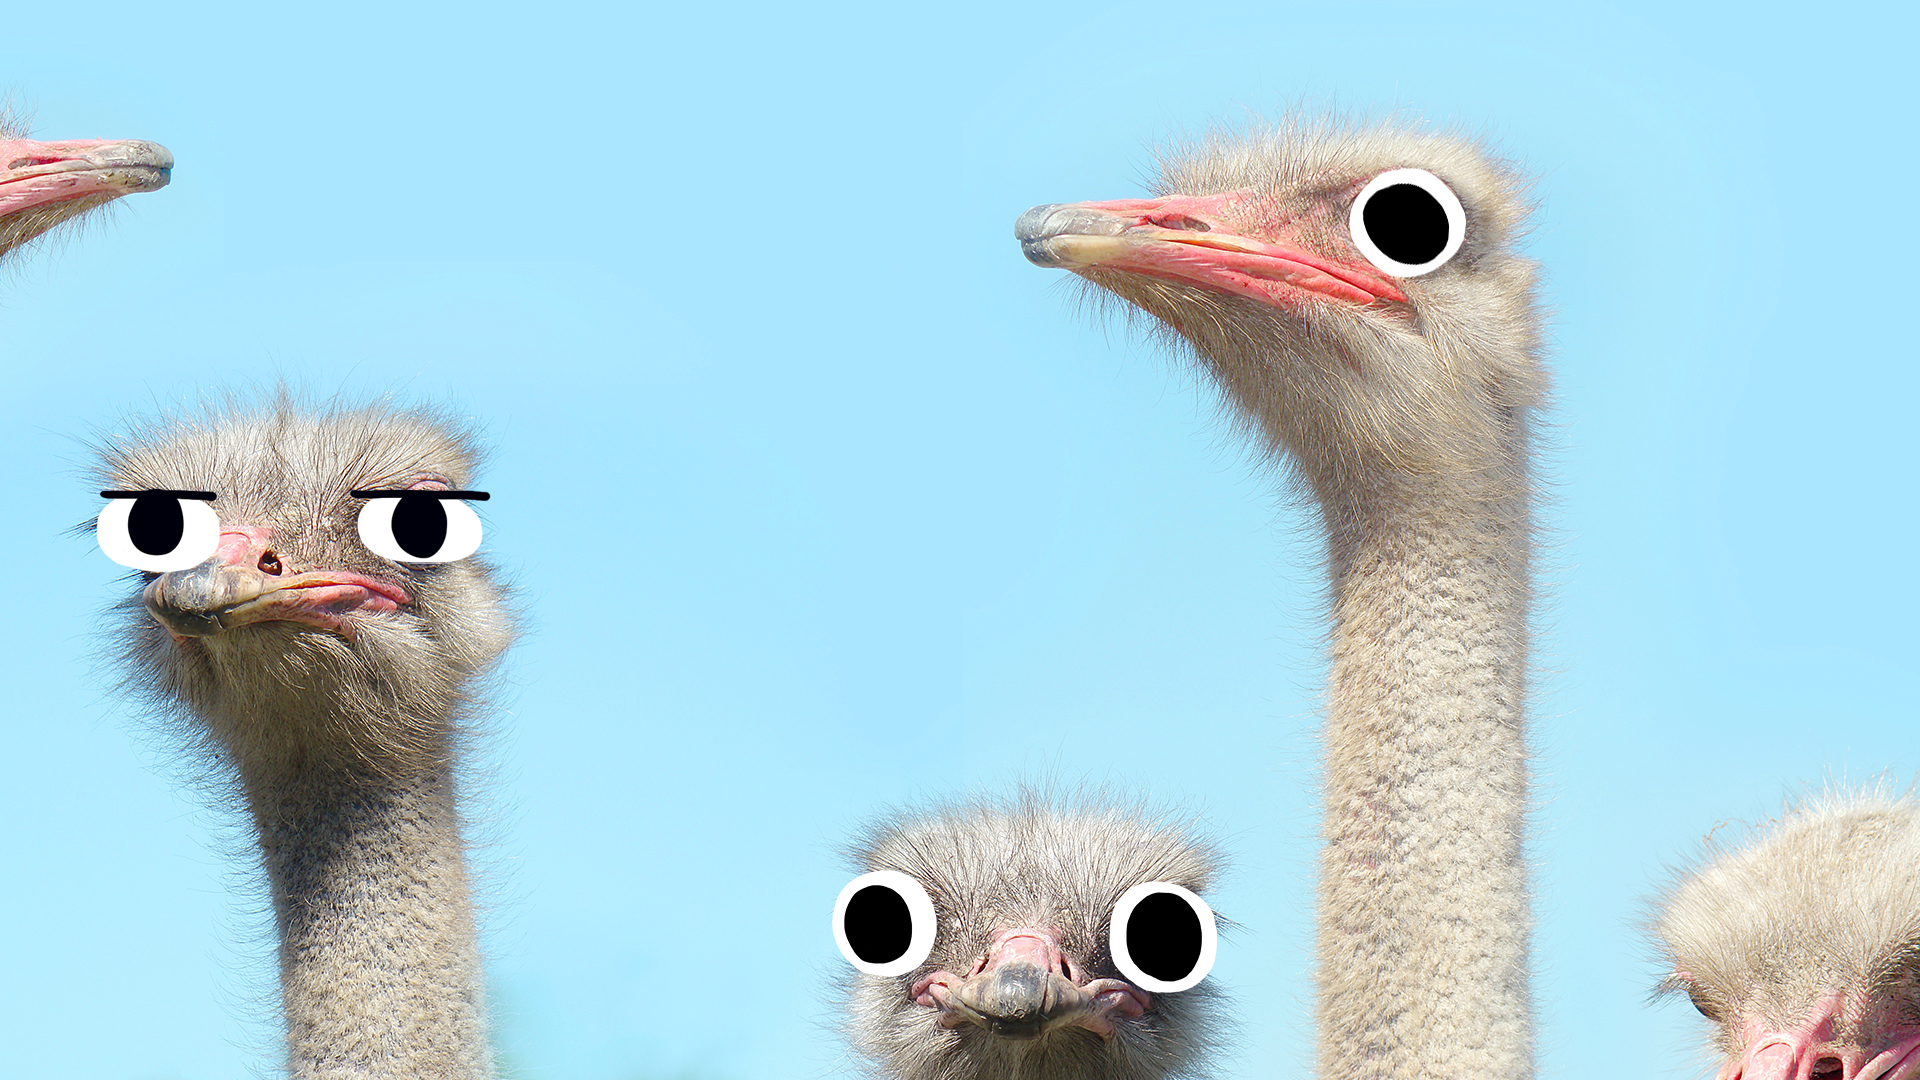 Some ostriches